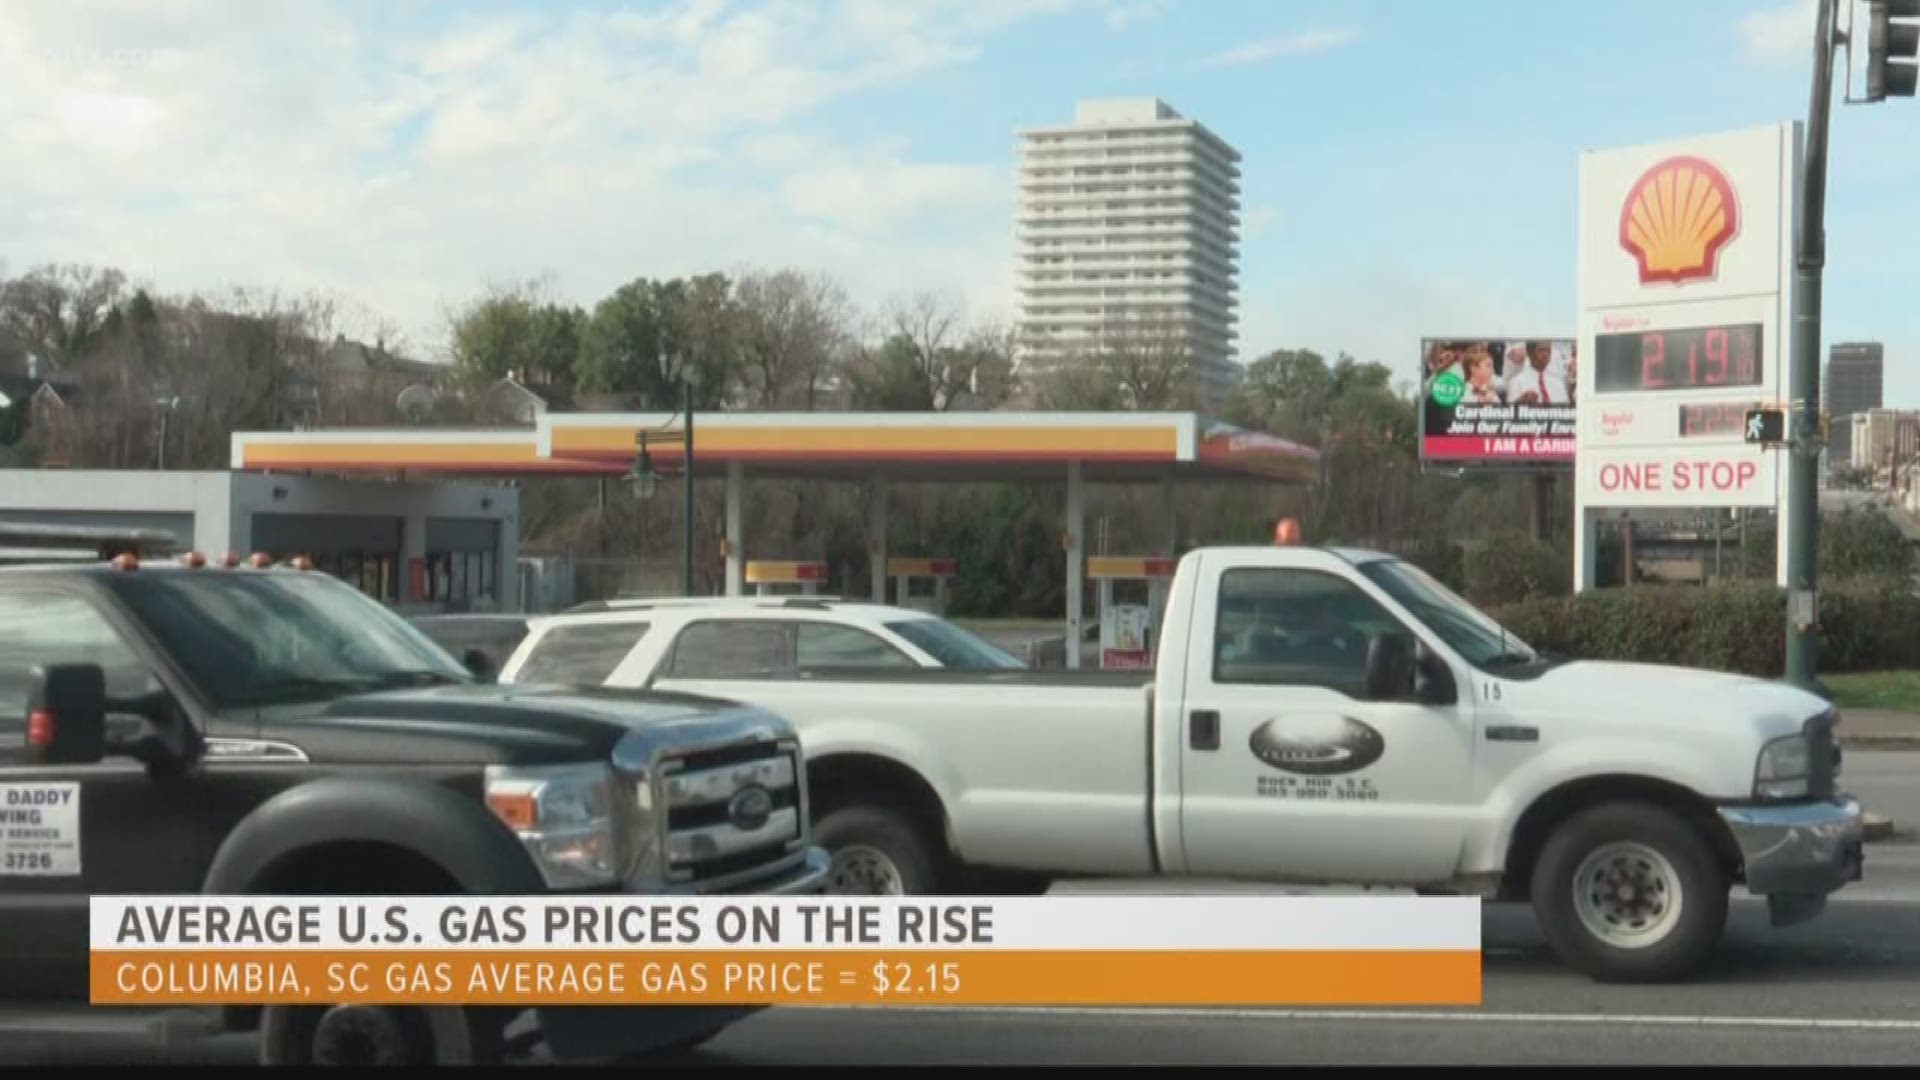 Gas prices are on the rise across the United States.  In Columbia, gas prices are averaging about $2.15 per gallon.